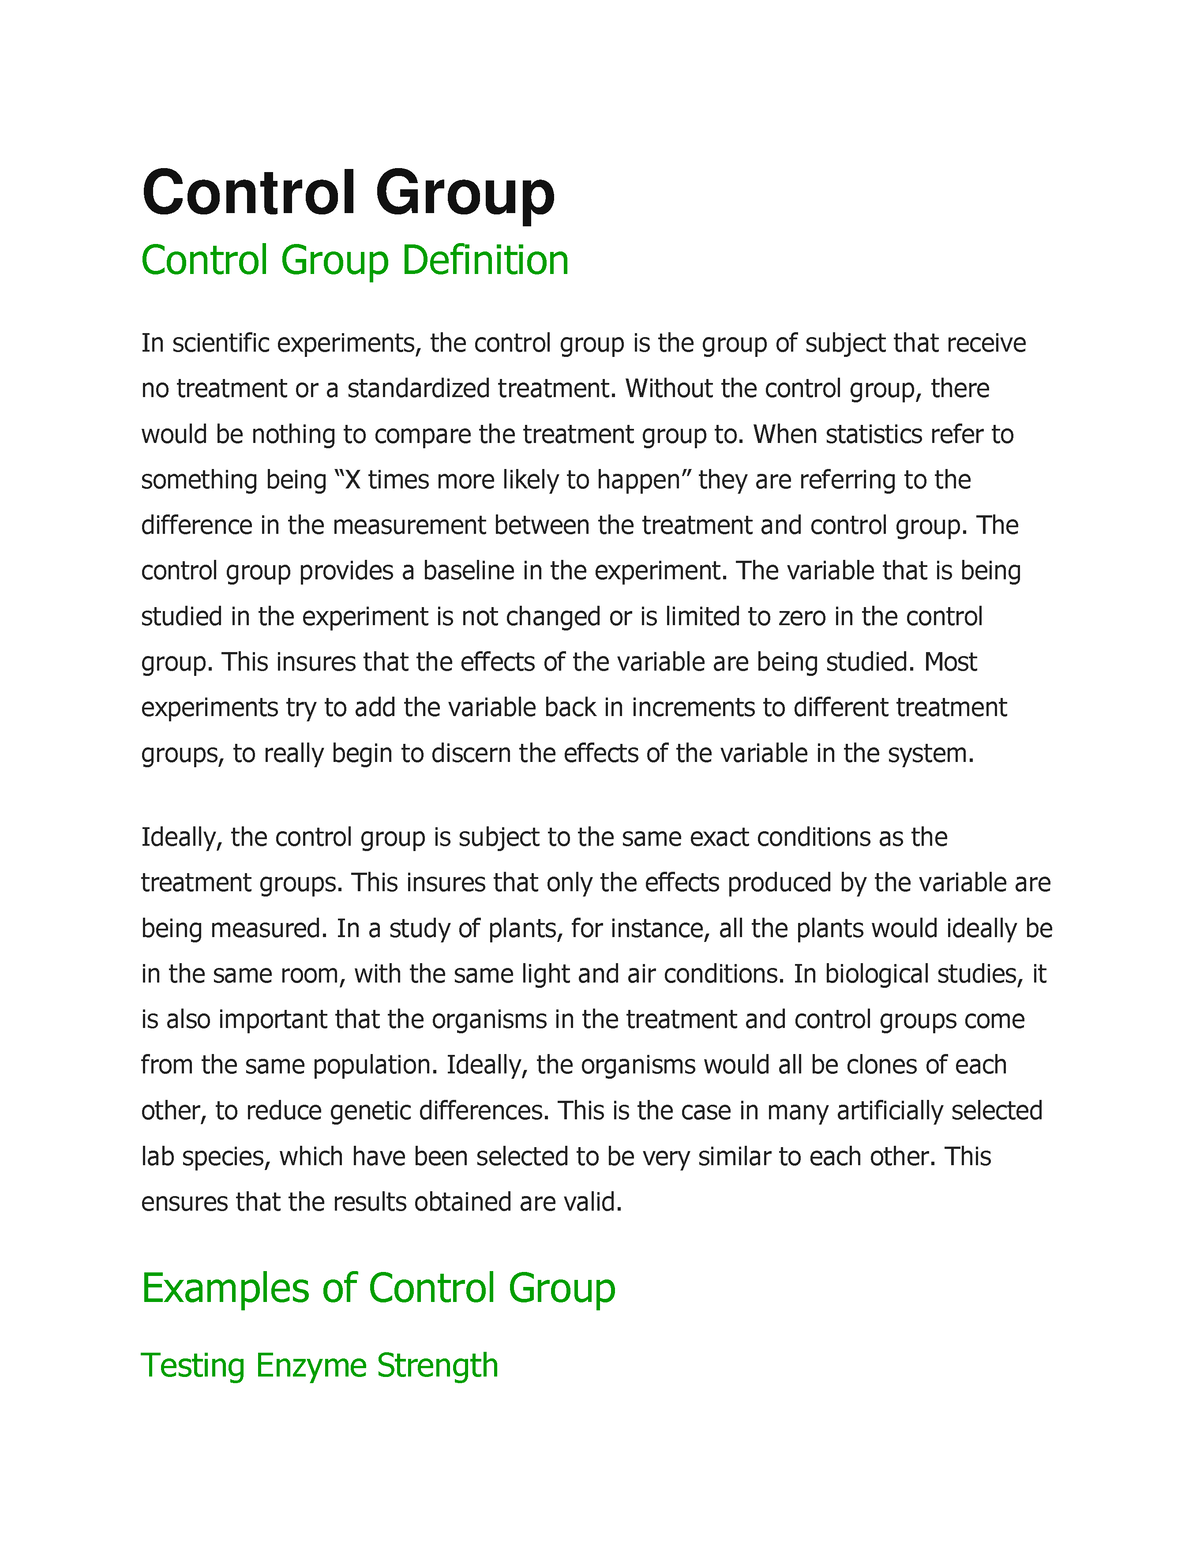 assignment to control group